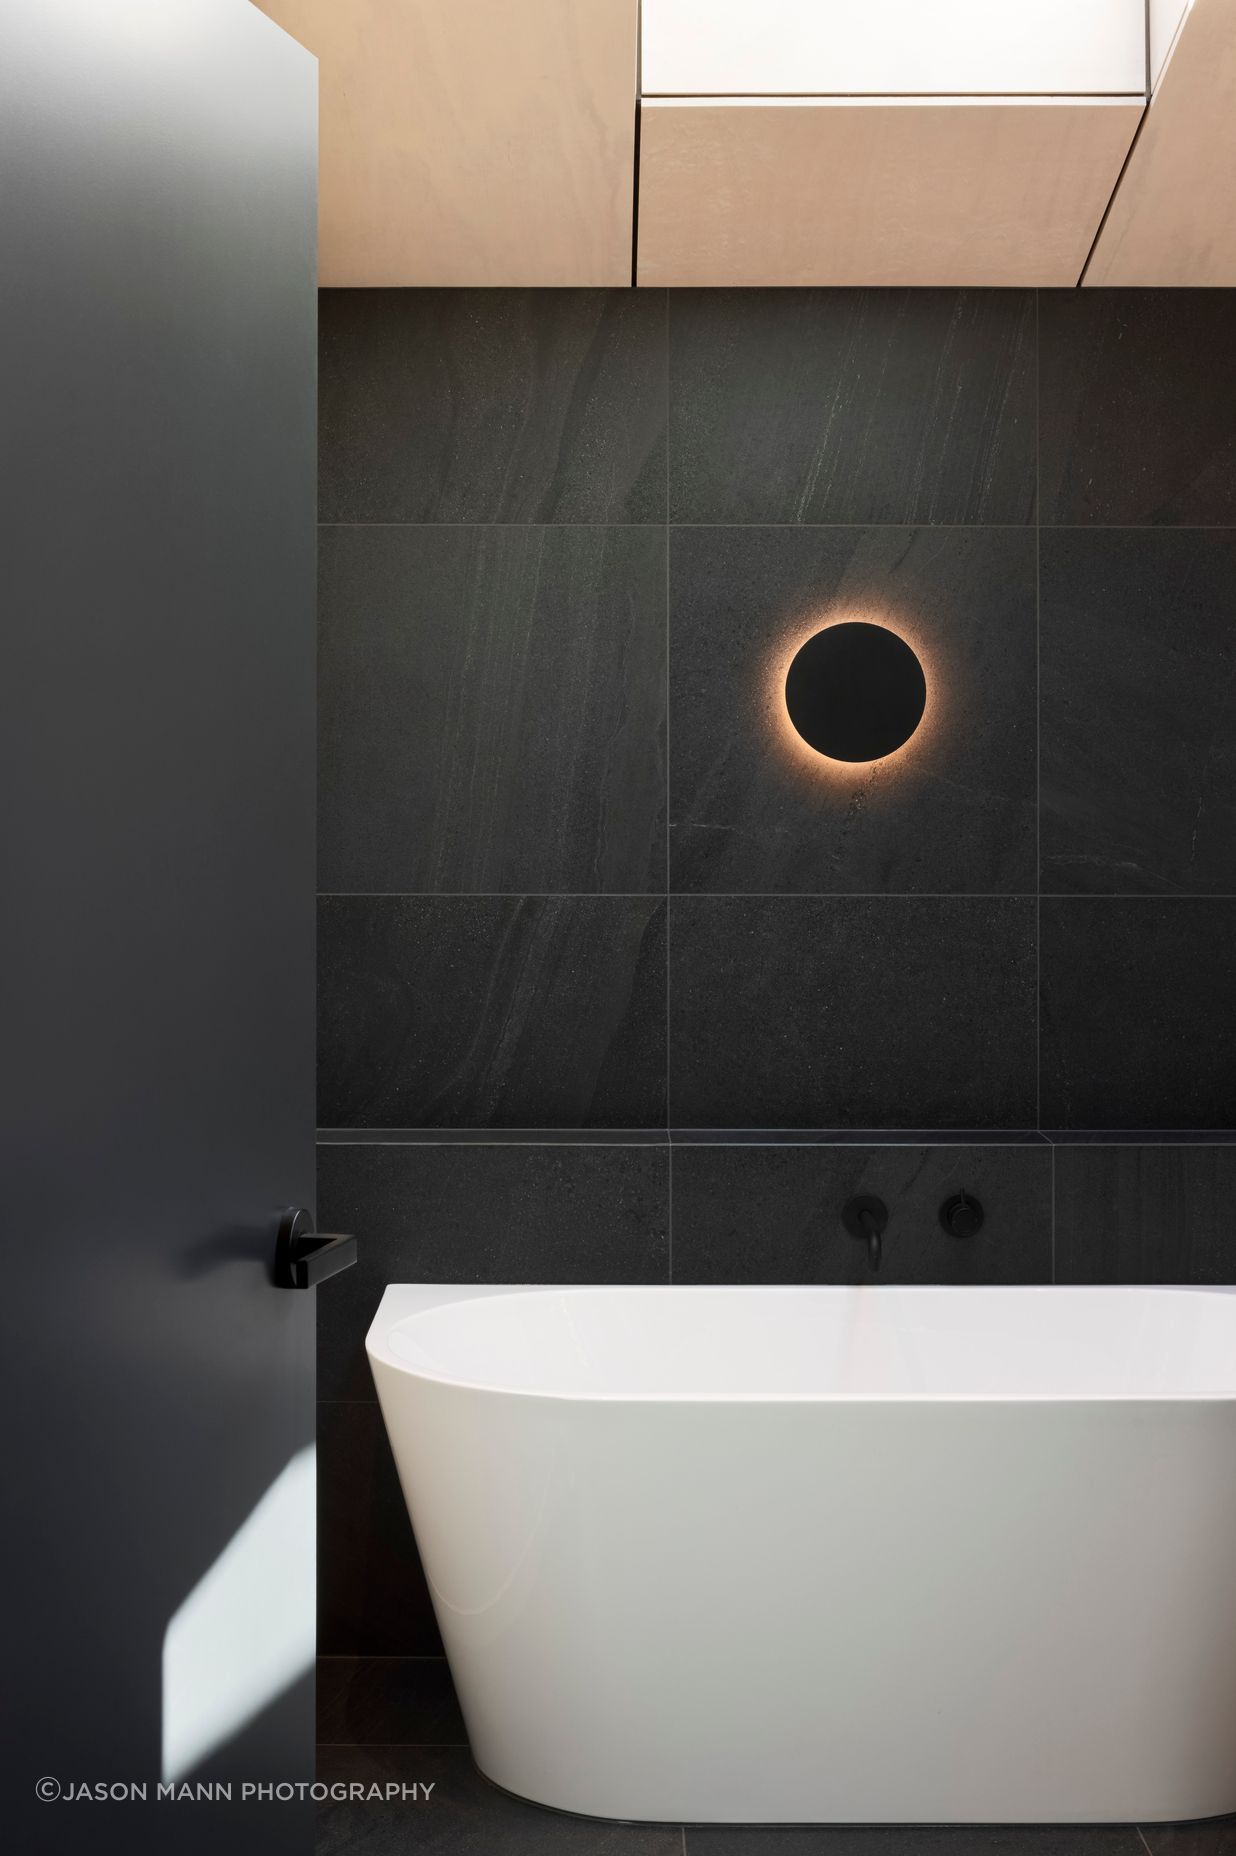 Natural timbers give way to dark stone tiles in the bathroom for a modern twist on the classic 'black and white' look.